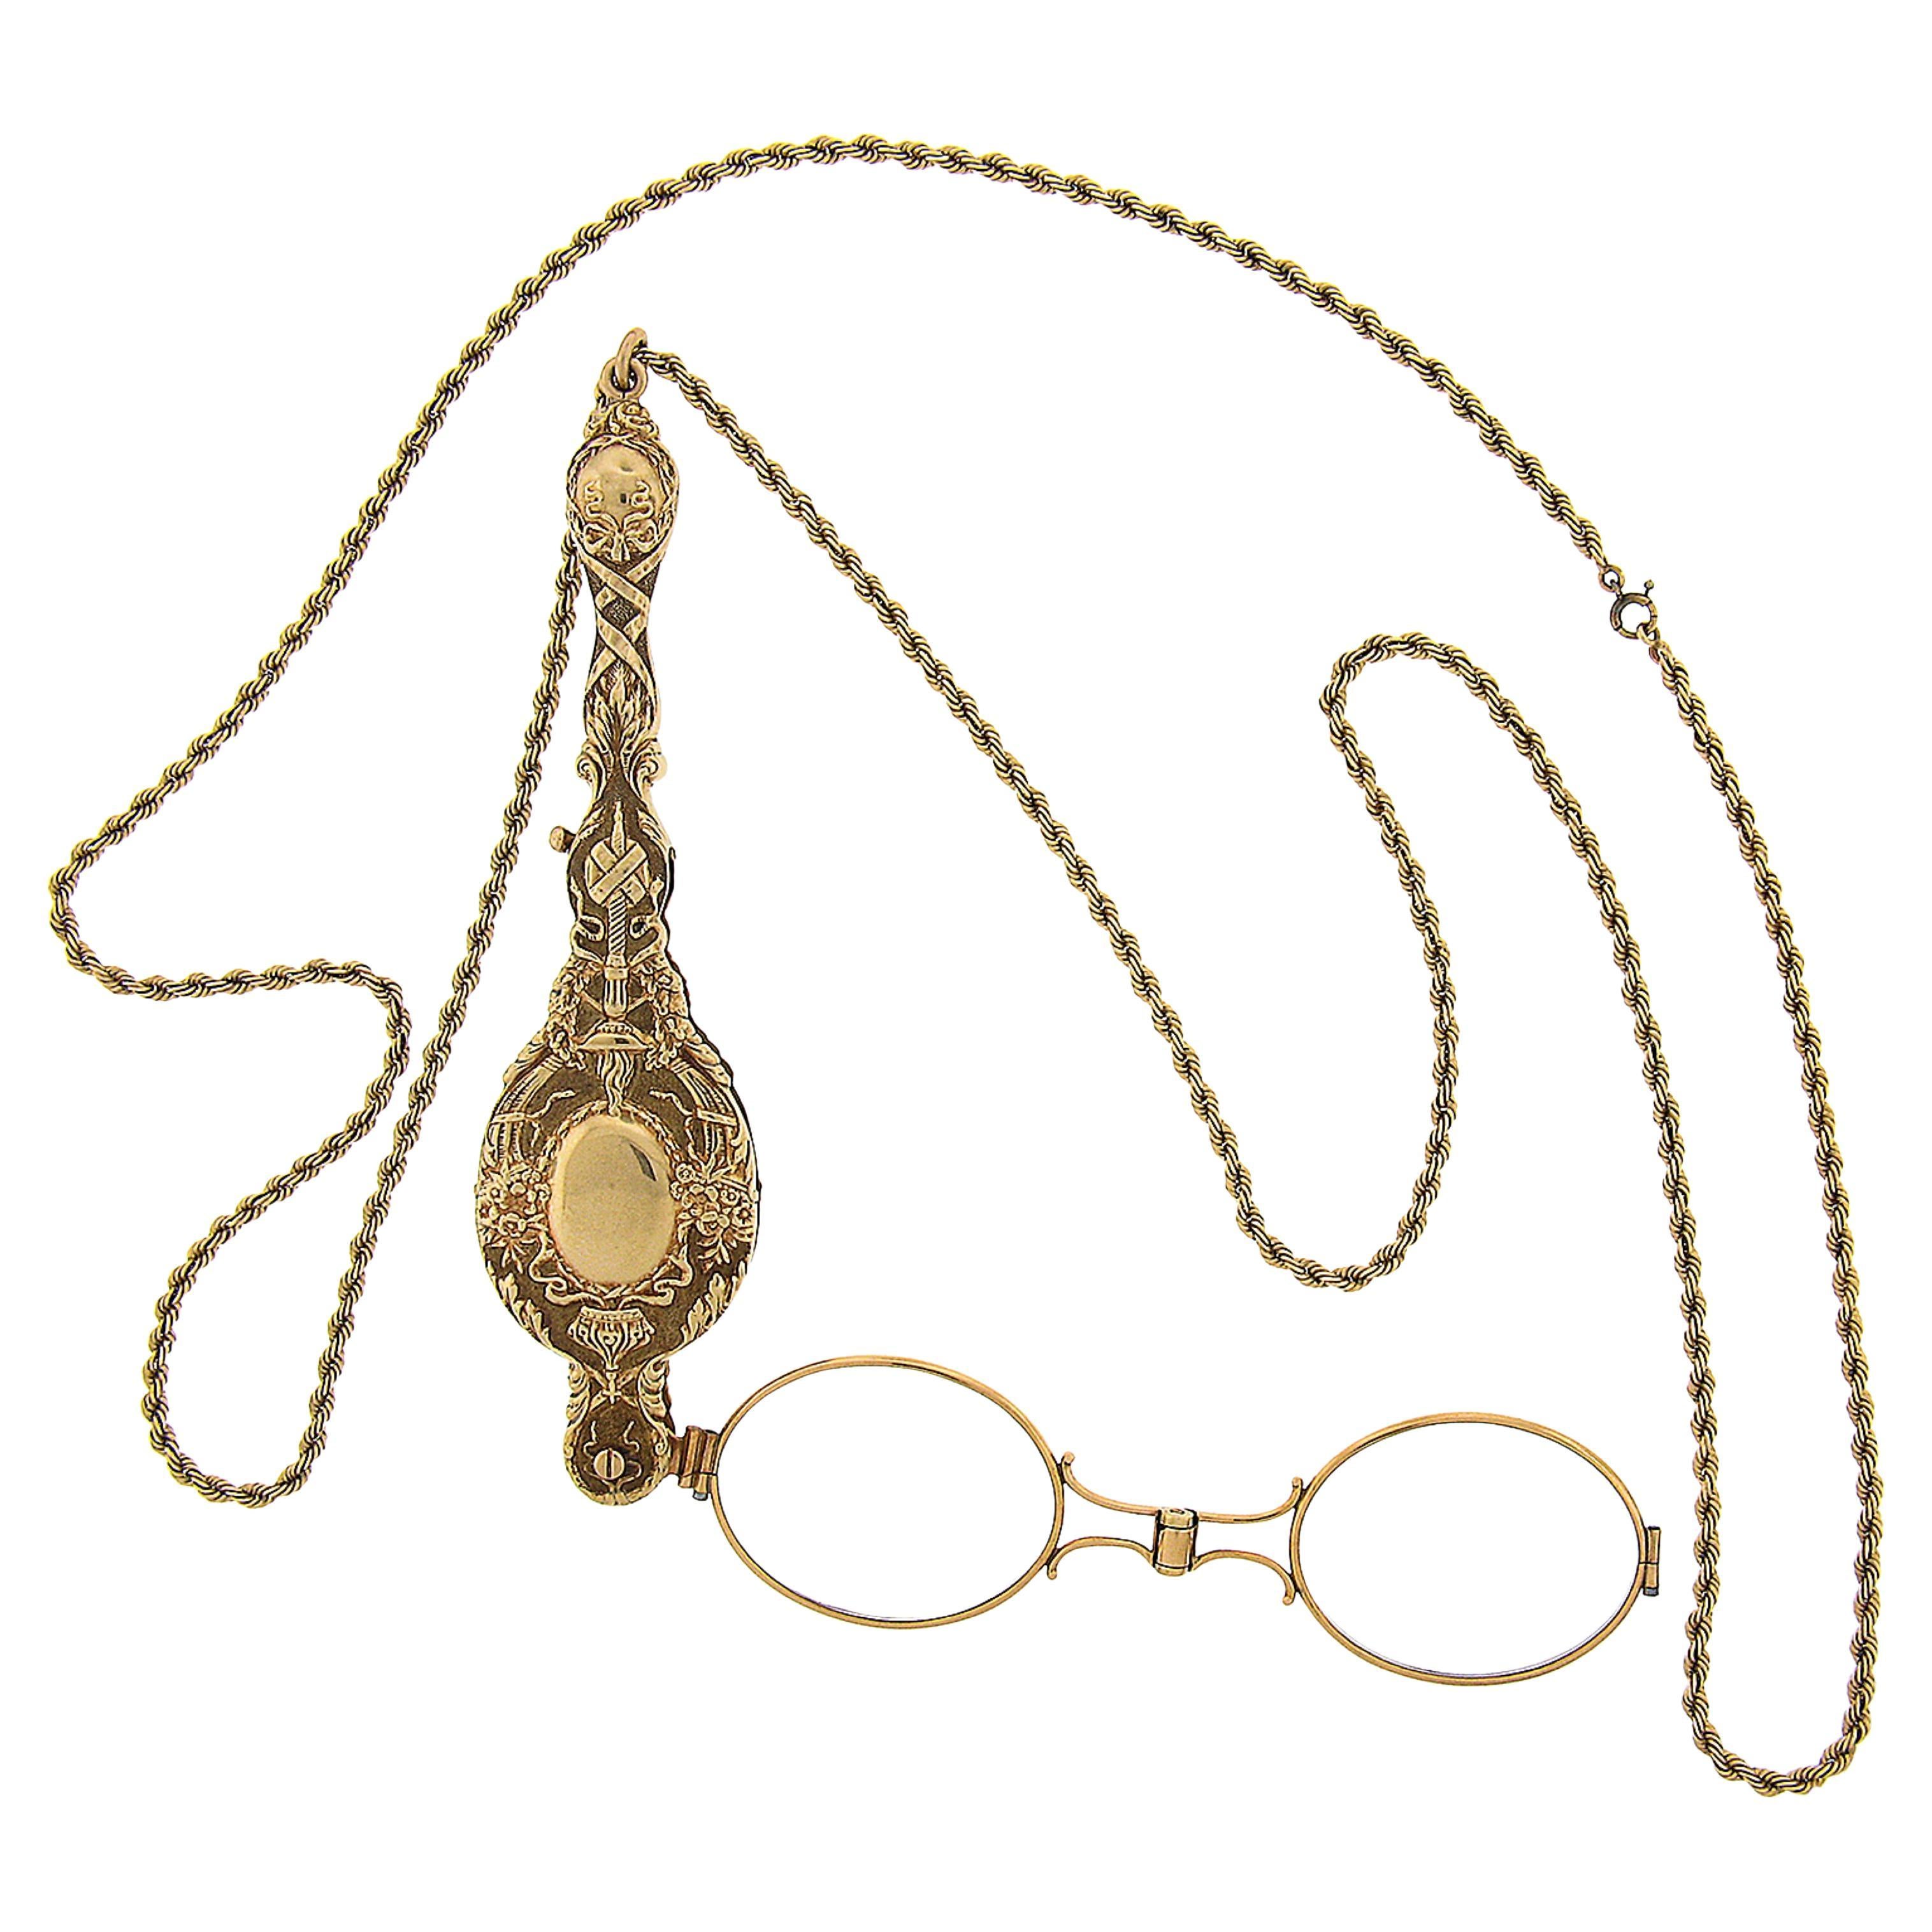 Vintage 14k Gold Collectible Lorgnette Opera Glasses & Rope Chain Necklace For Sale